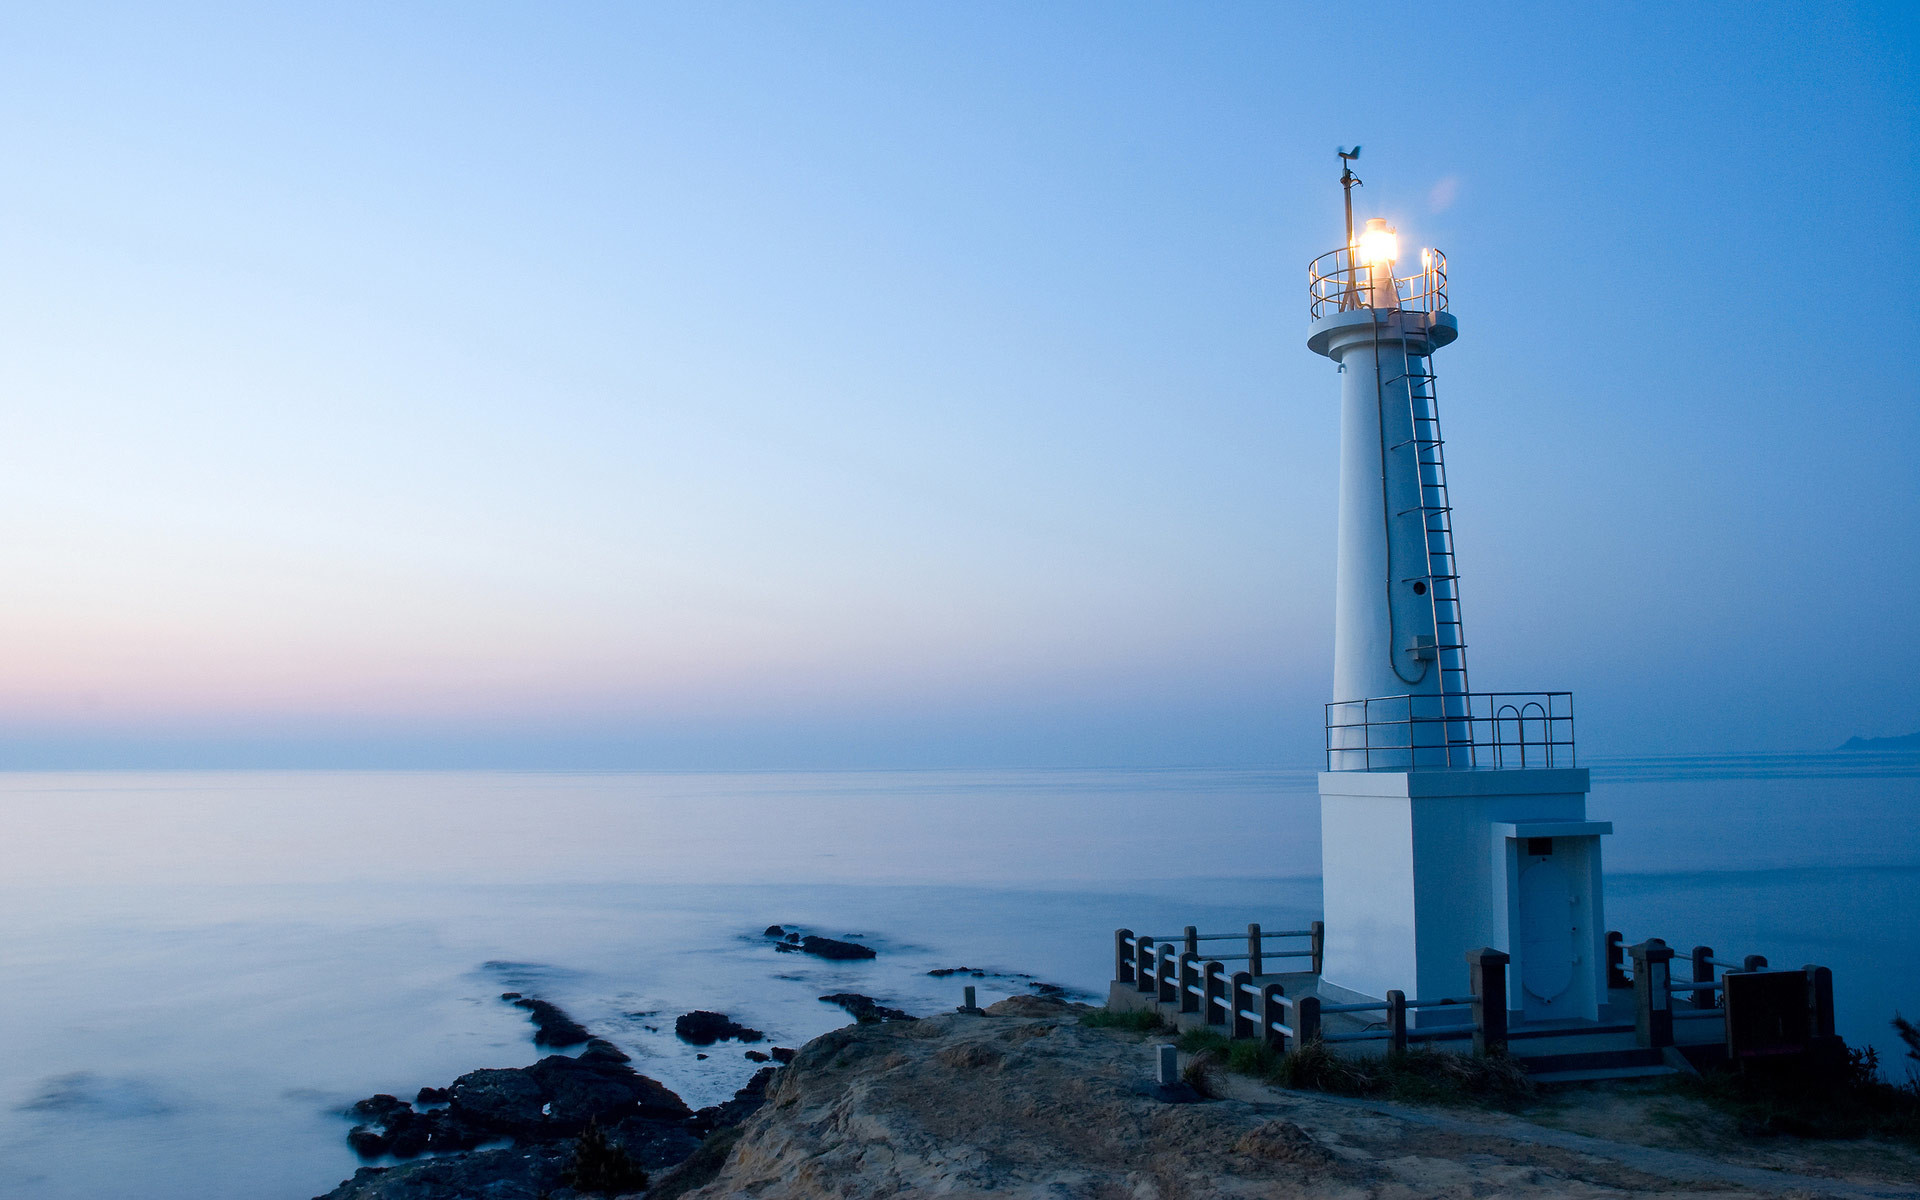 Lighthouse Background Pictures